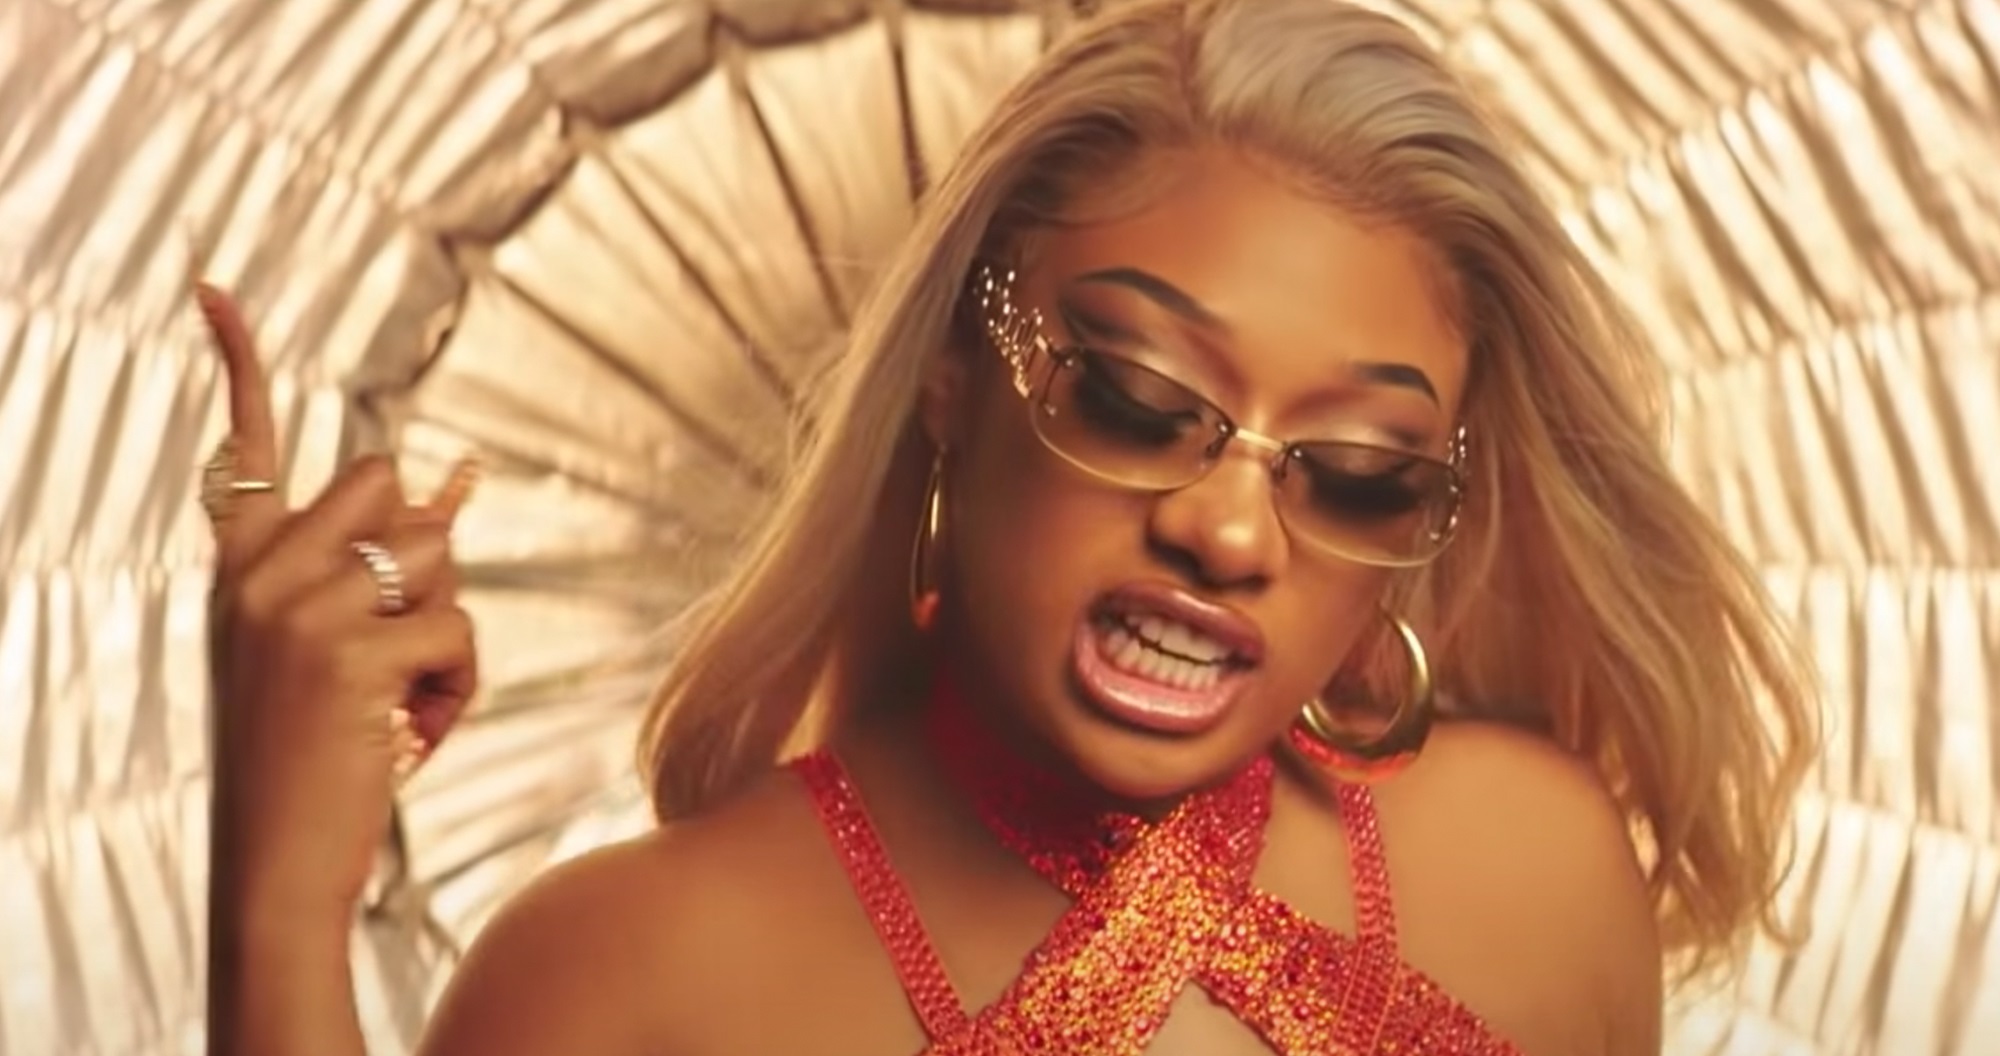 Watch – Megan Thee Stallion’s Hot New Music Video For ‘Movie (ft. Lil Durk)’